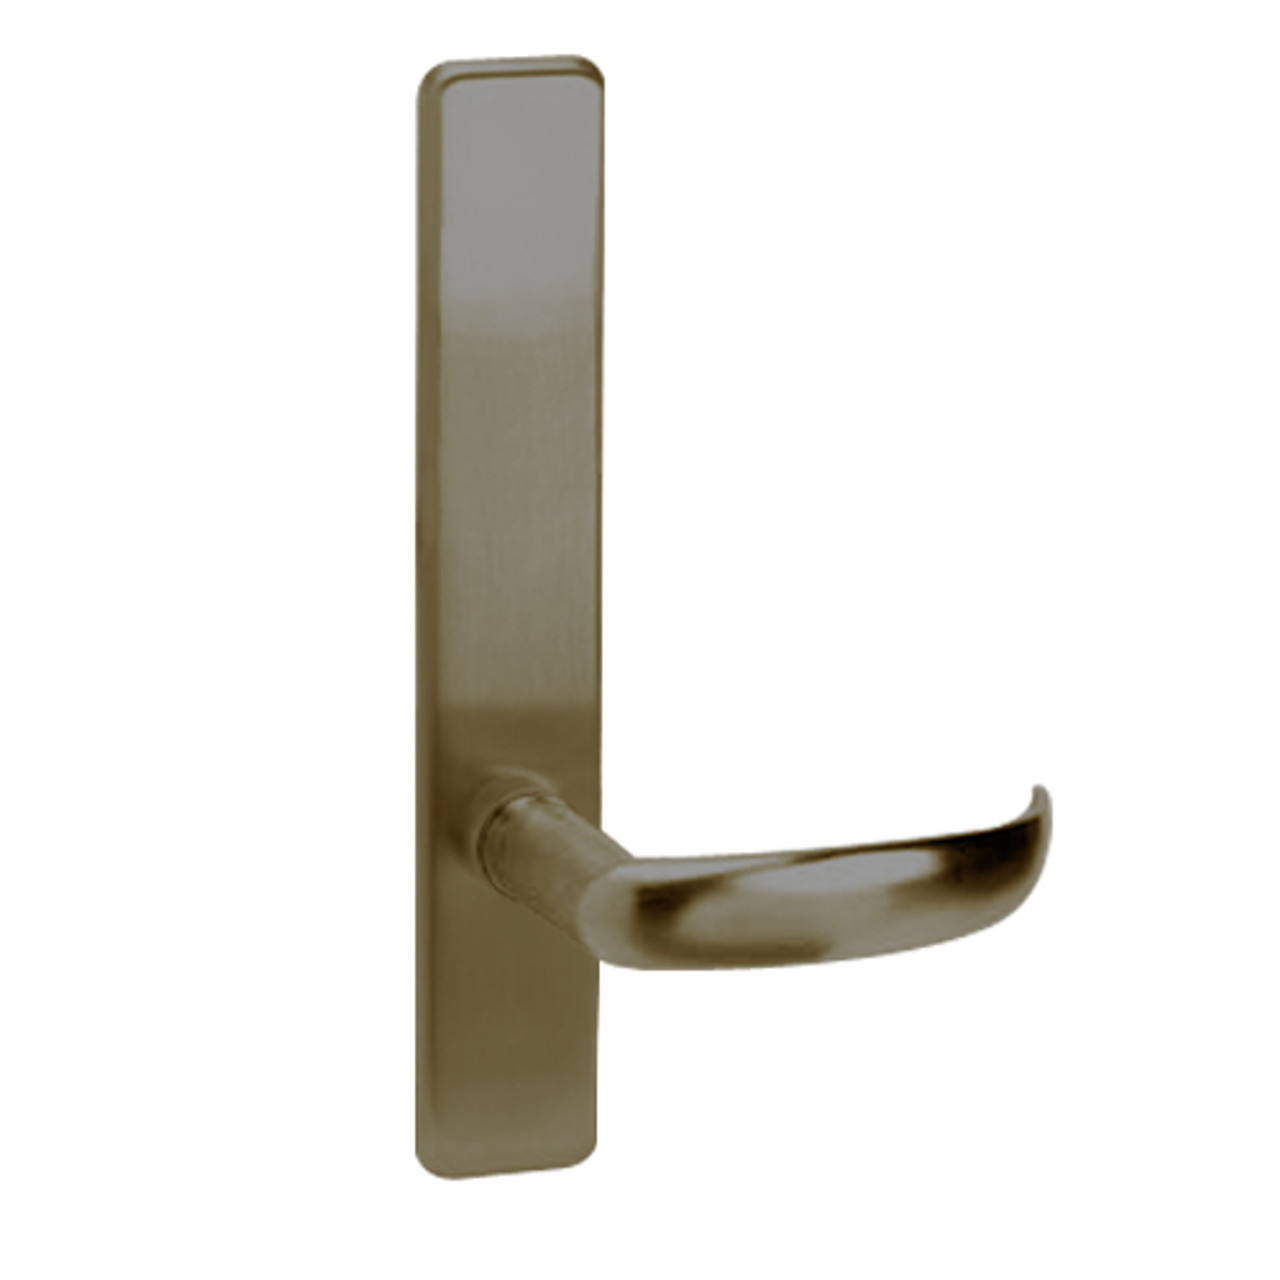 PR850-613-LHR Corbin ED4000 Series Exit Device Trim with Dummy Princeton Lever in Oil Rubbed Bronze Finish